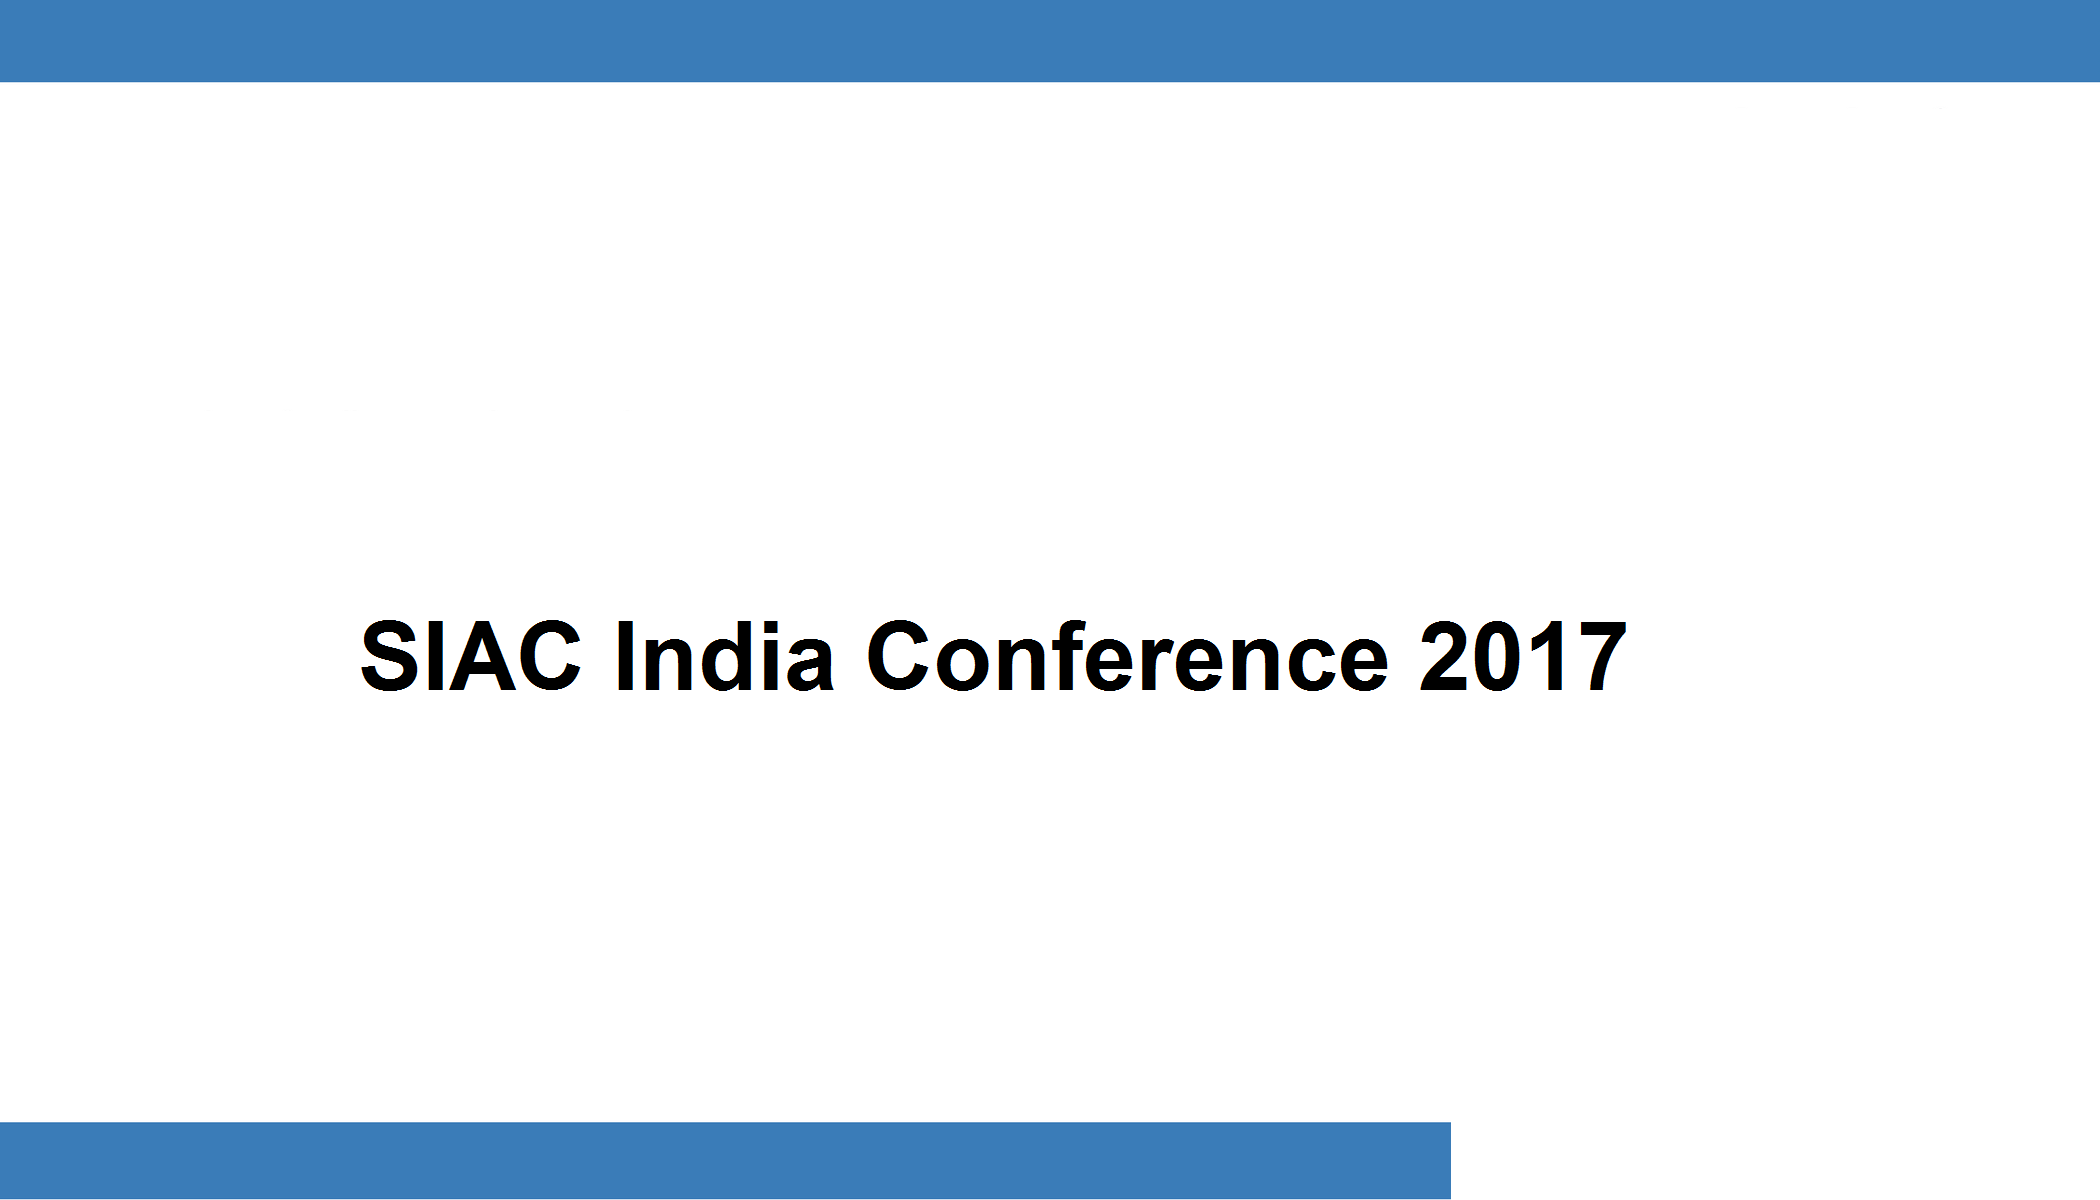 SIAC India Conference 2017